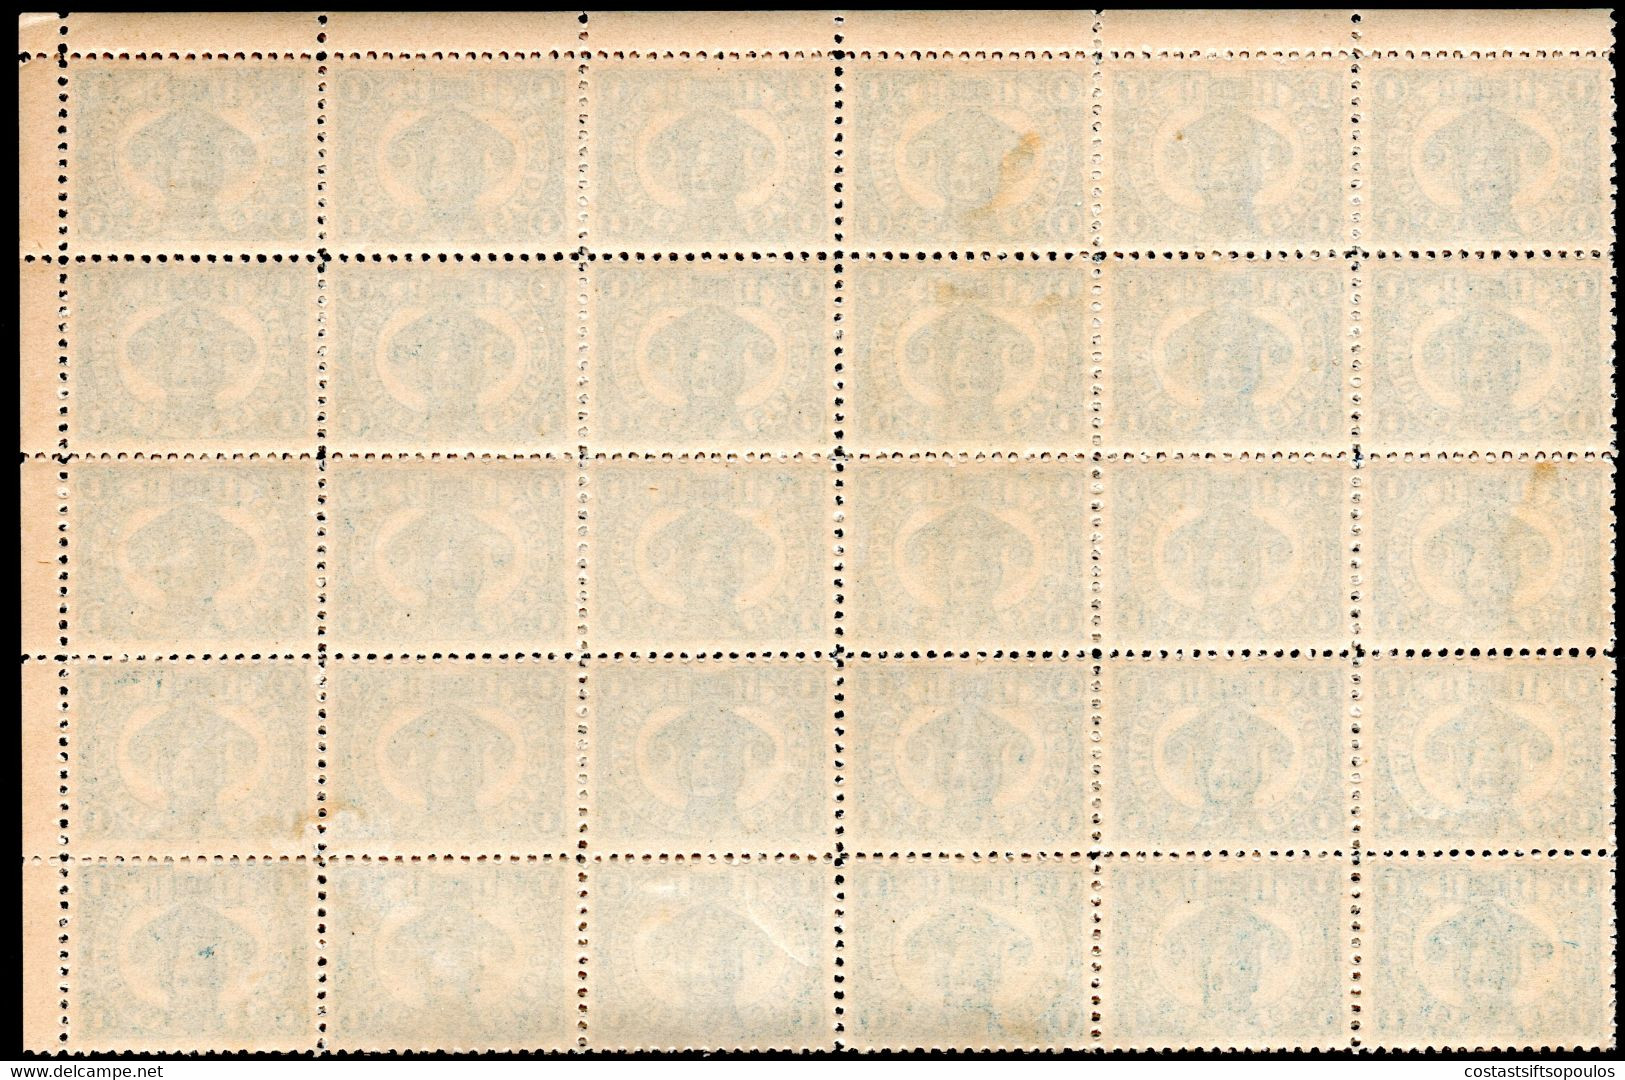 147.SWEDEN LOCAL,1887 STOCKHOLMS STADSPOST 1 ORE,MNH SHEET OF 60,FOLDED IN THE MIDDLE - Emisiones Locales